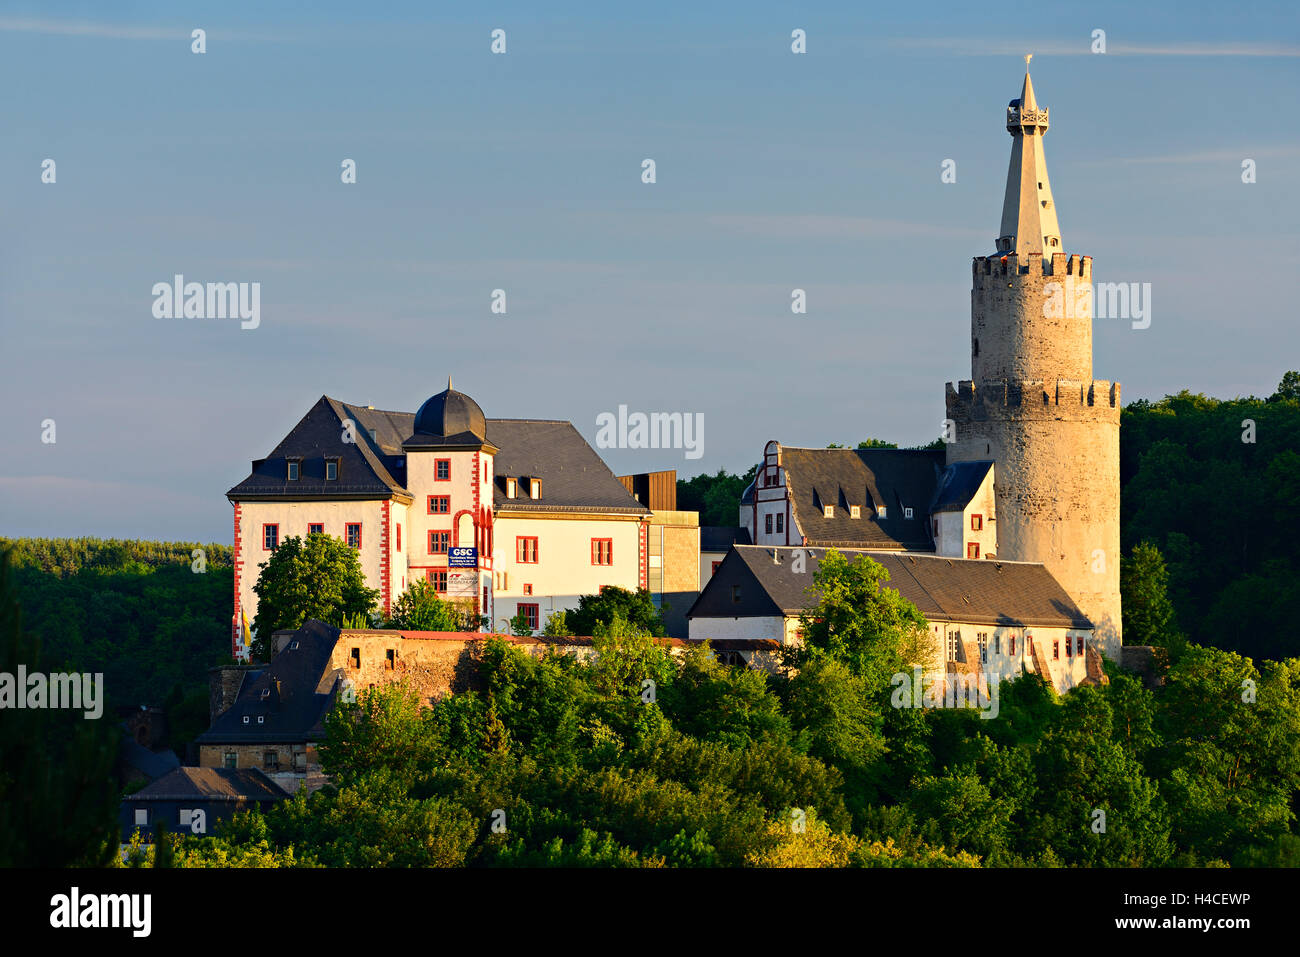 Germany, Thuringia, Weida, the castle Osterburg in the evening light ...